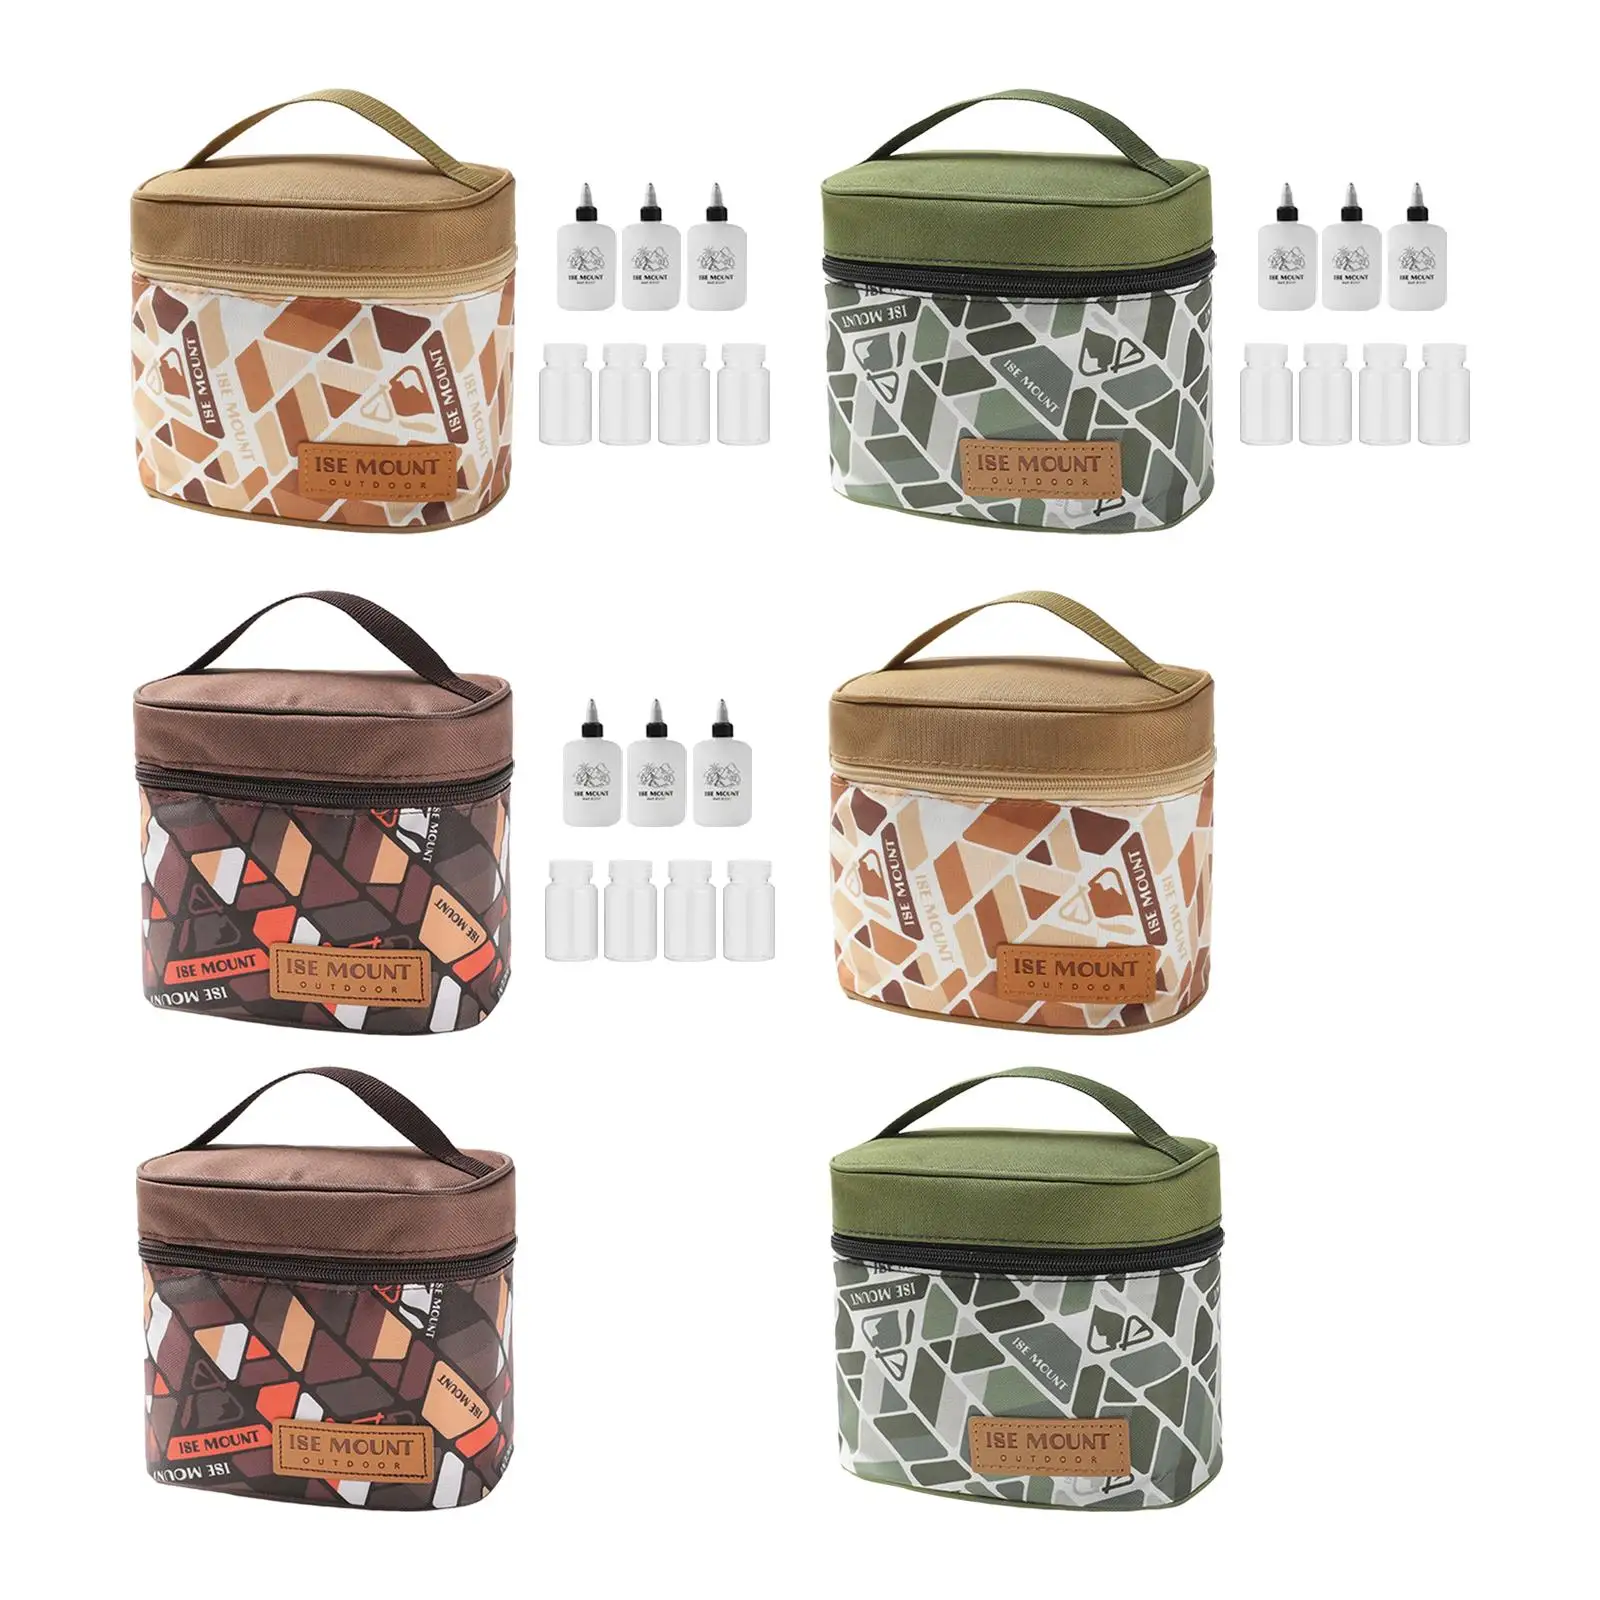 Spice Bag Spice Containers Lightweight Mini Condiment Bag Sauce Storage Organizer for Cooking Travel Outdoor Picnic Kitchen